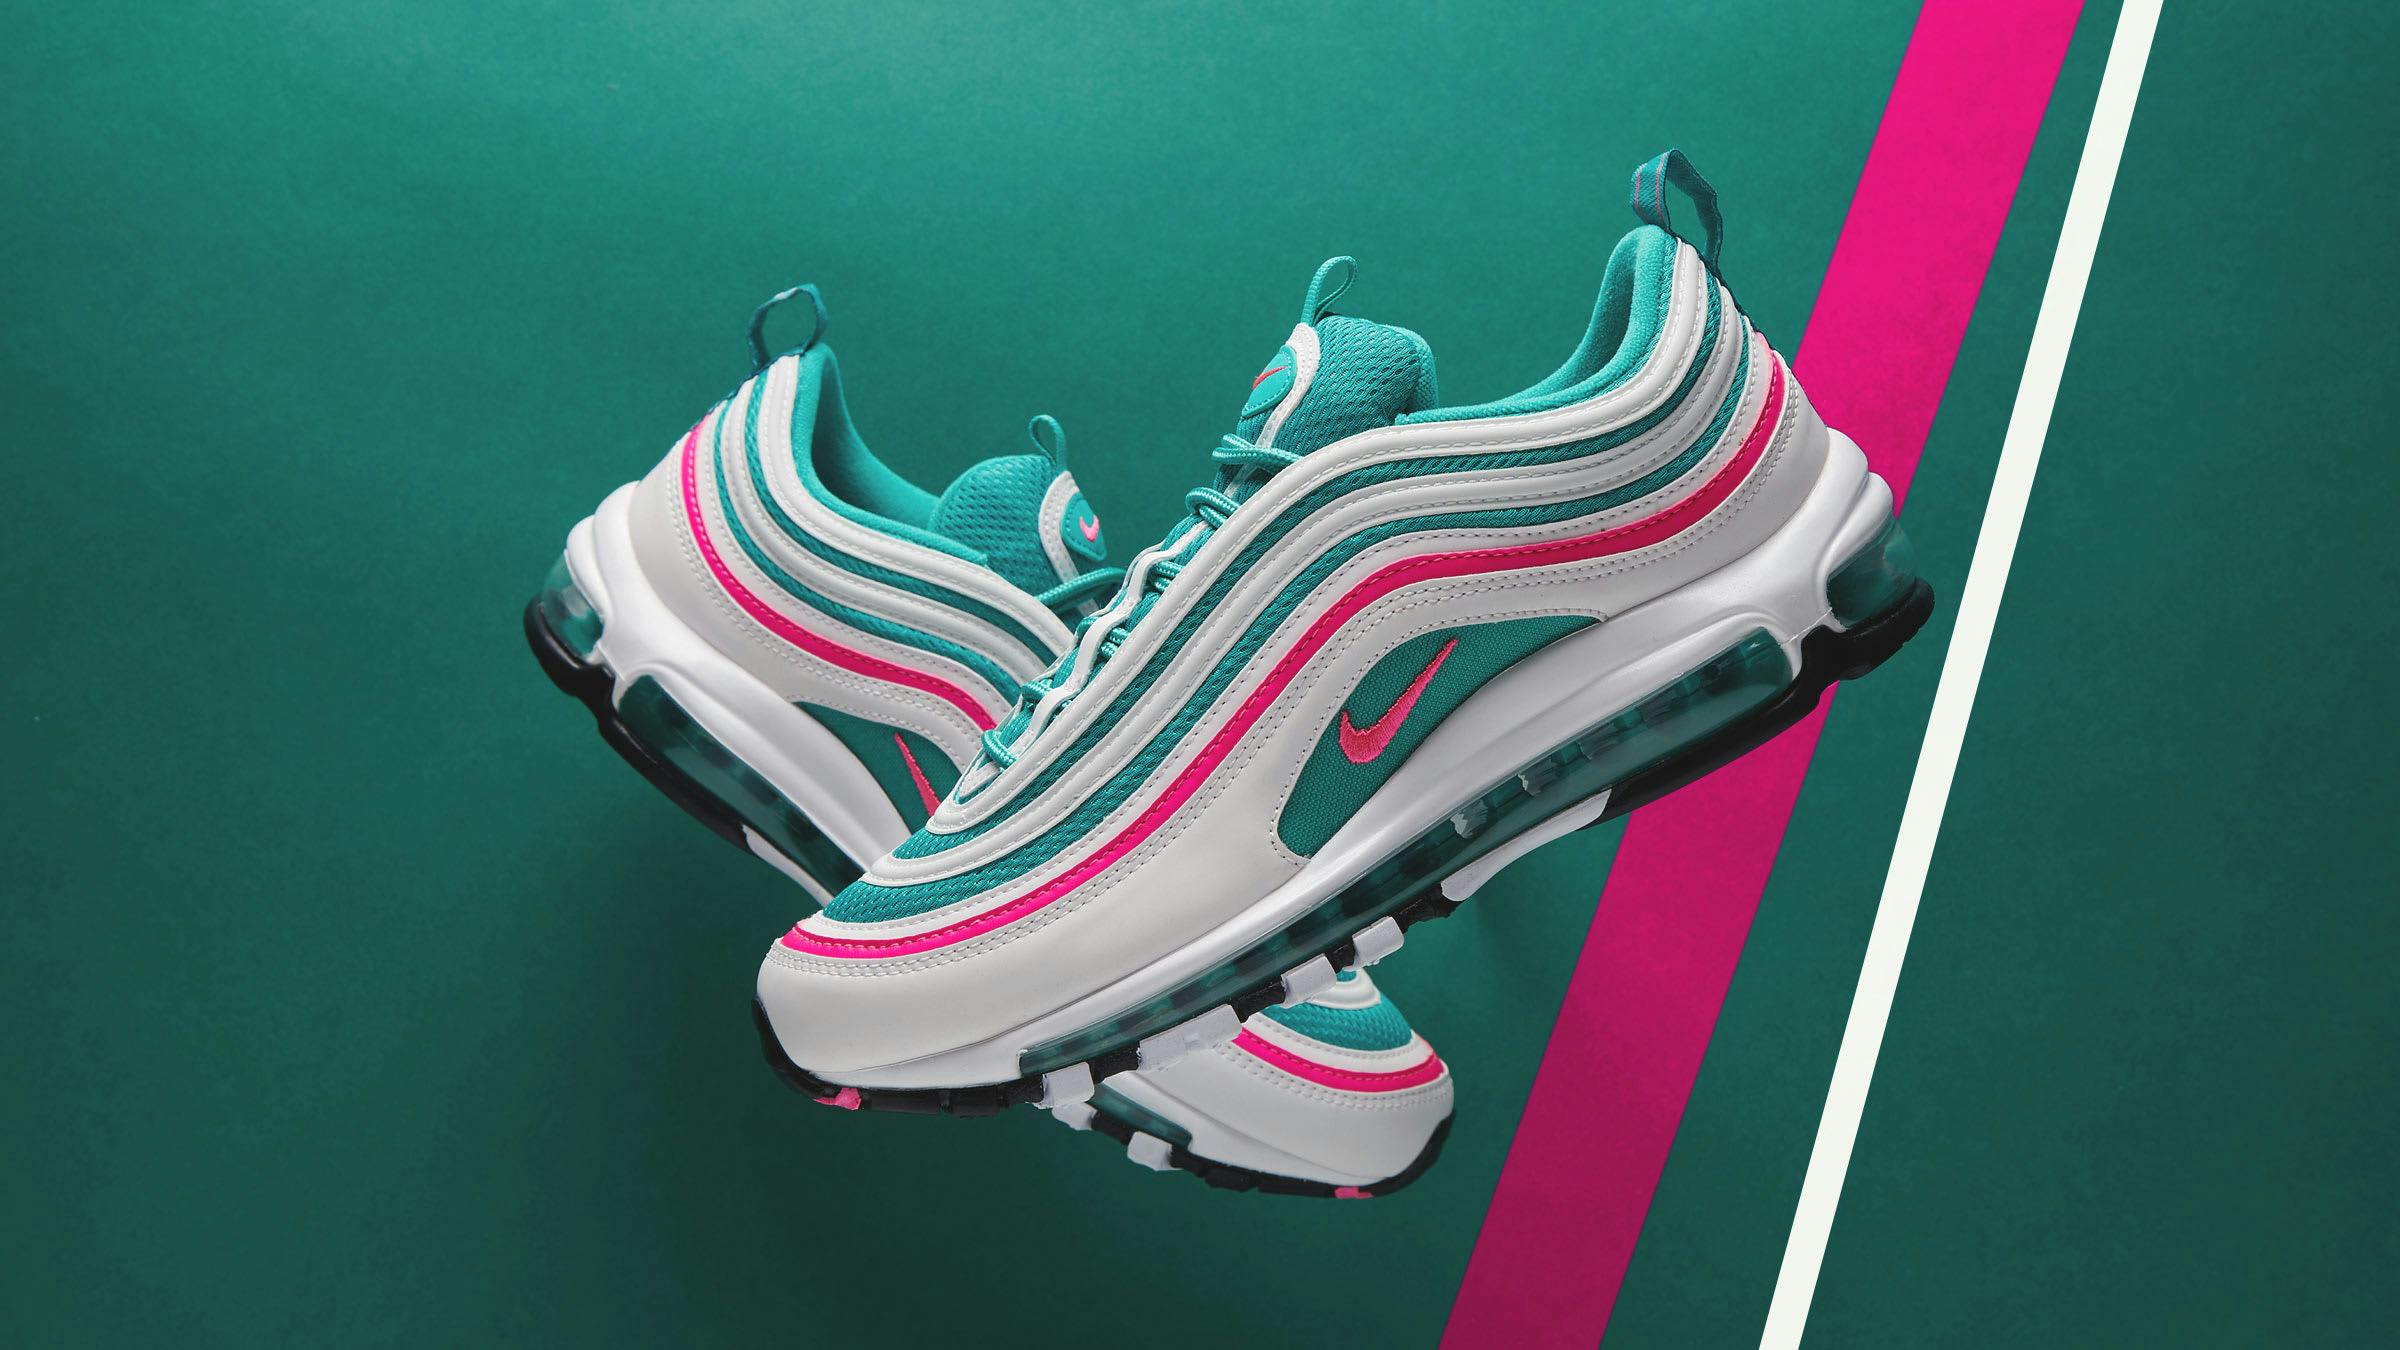 Datum zweer naar voren gebracht Nike Air Max 'Miami Vice' Pack - Register Now on END. (SG) Launches | END.  (SG)